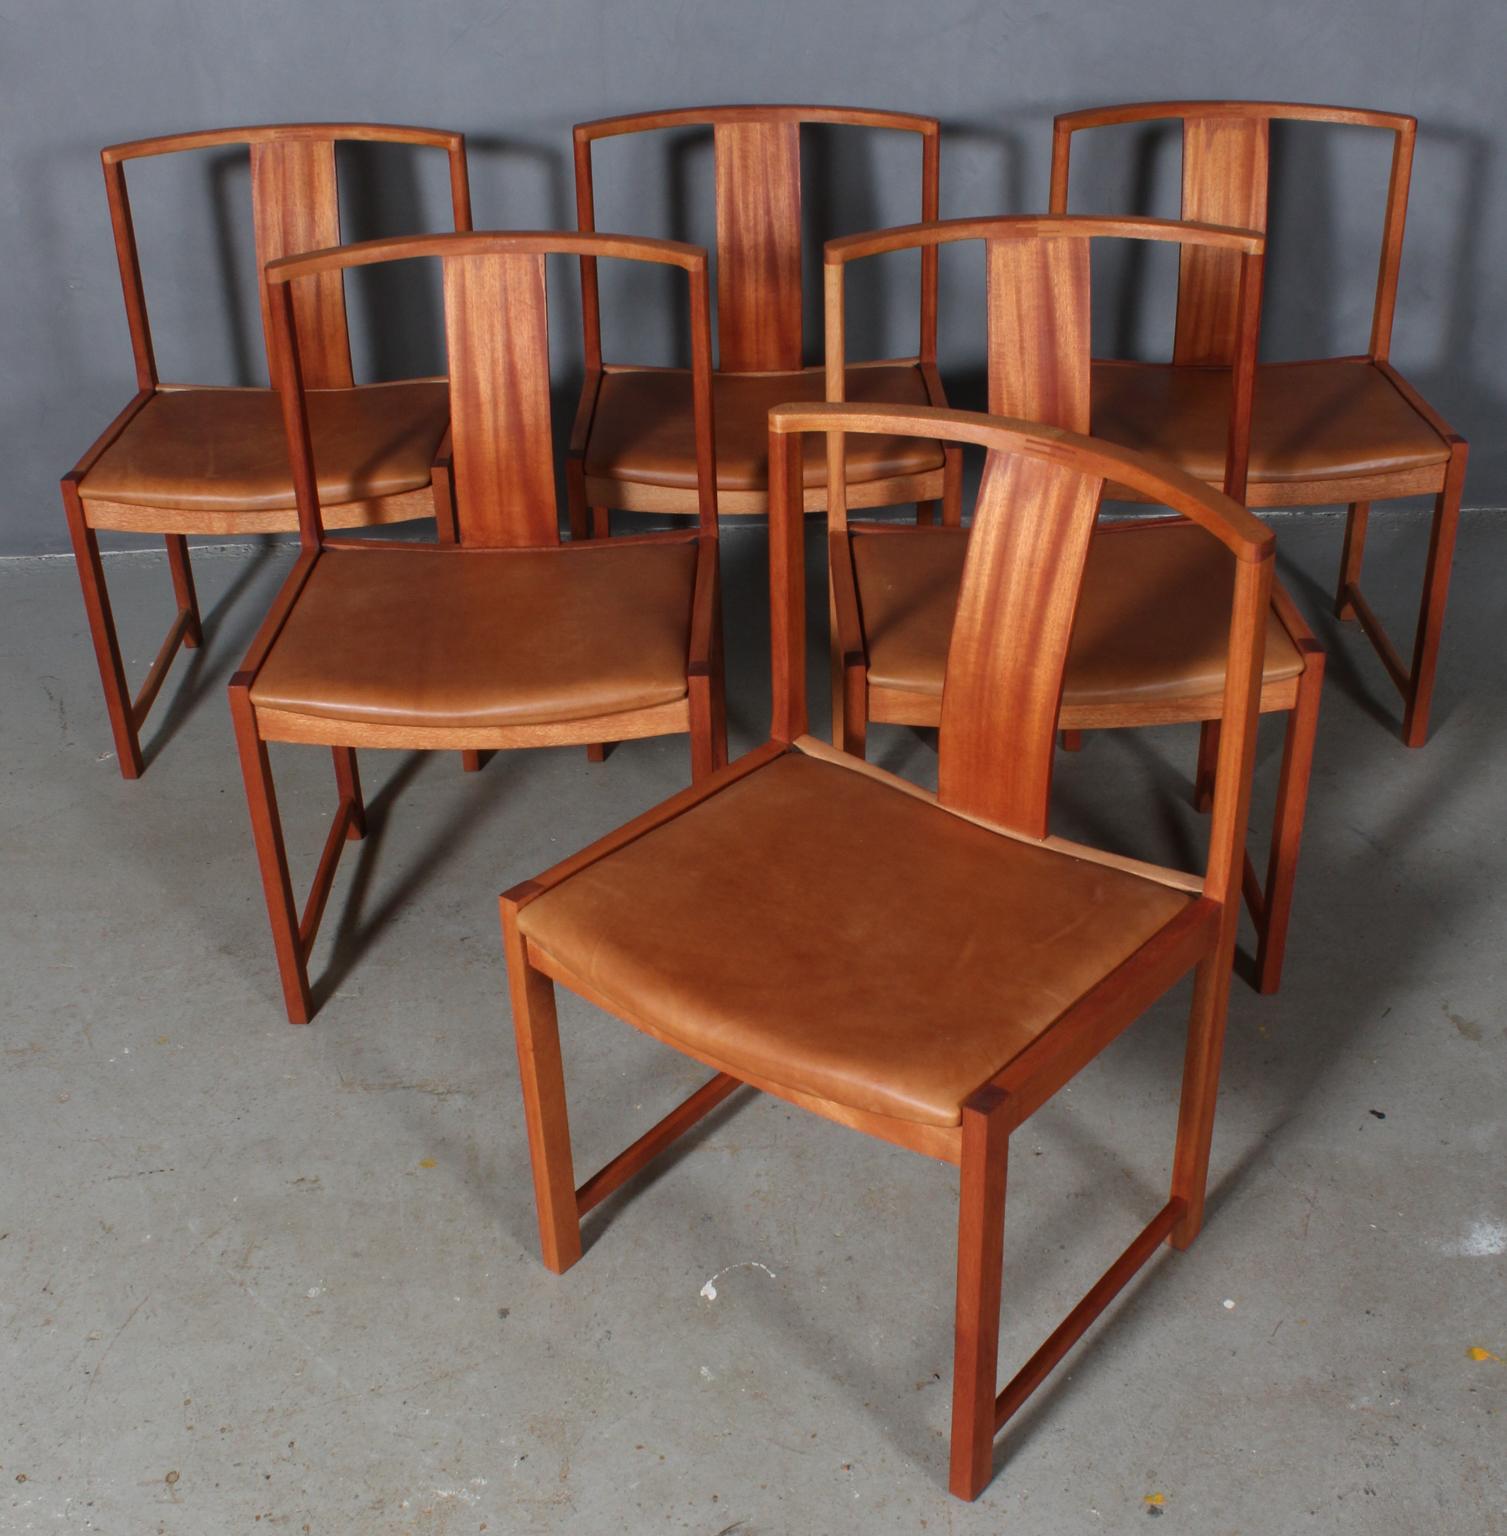 Steen Eiler Rasmussen set of six dining chairs in mahogany.

Seat new upholstered with vintage tan aniline leather.